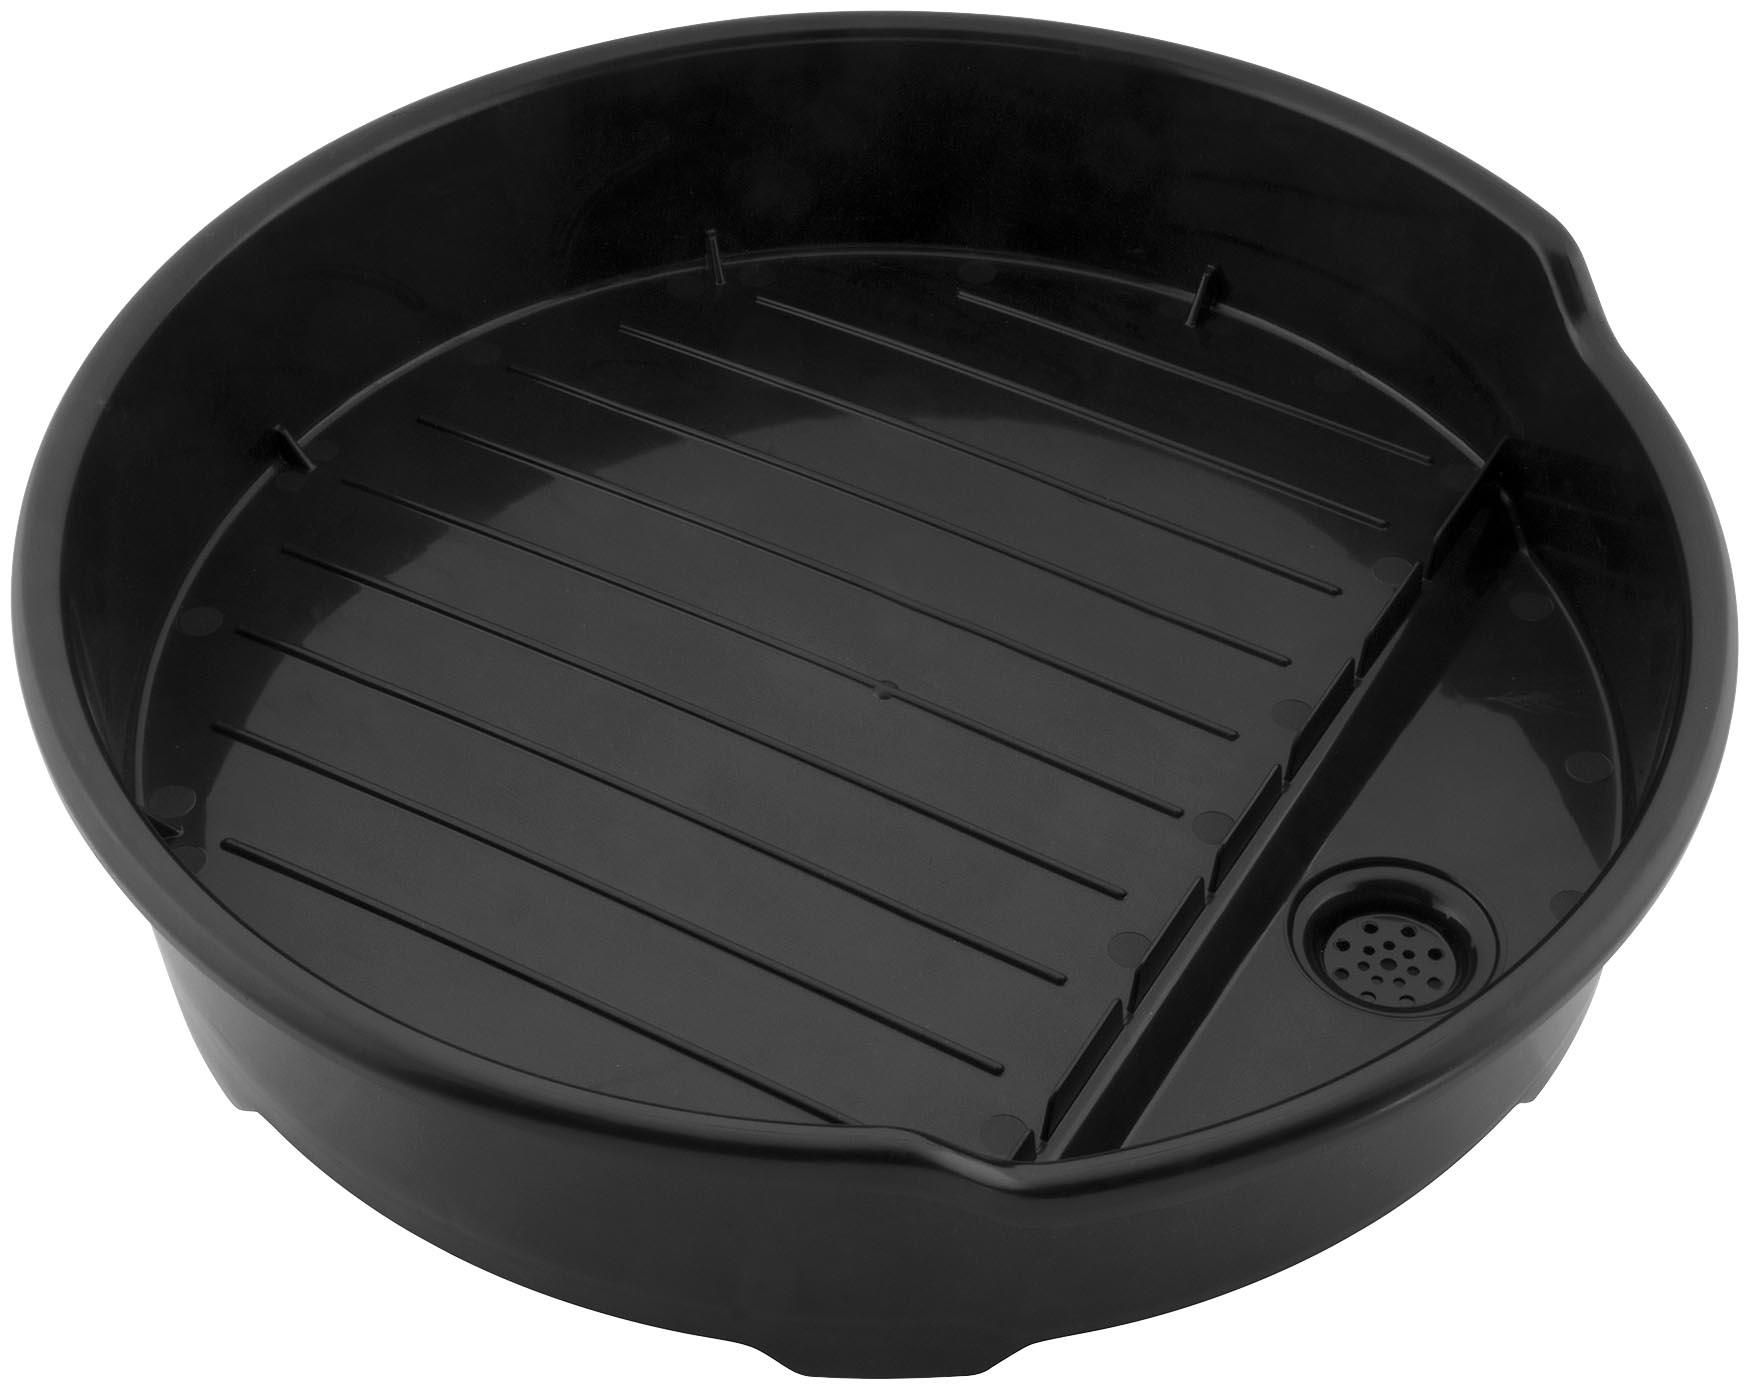 3WFO-BIKEMASTER-LY-550 55 Gal. Drum Drain Container Cover